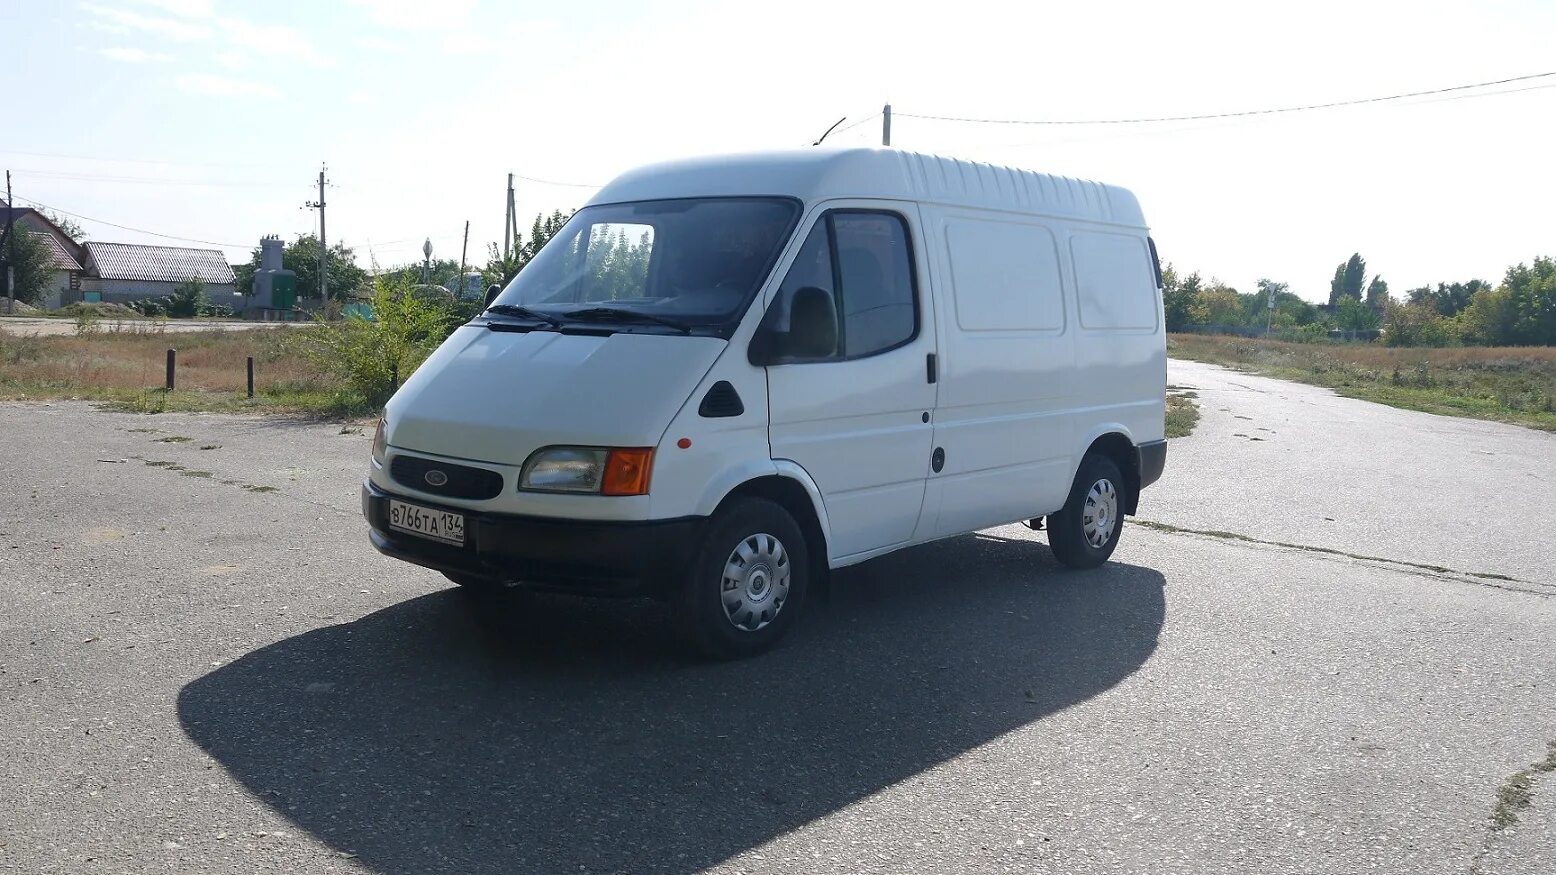 Ford Transit 1997. Форд Транзит 1997г. Ford Transit 1997 74. Форд Транзит 1997 грузовой.